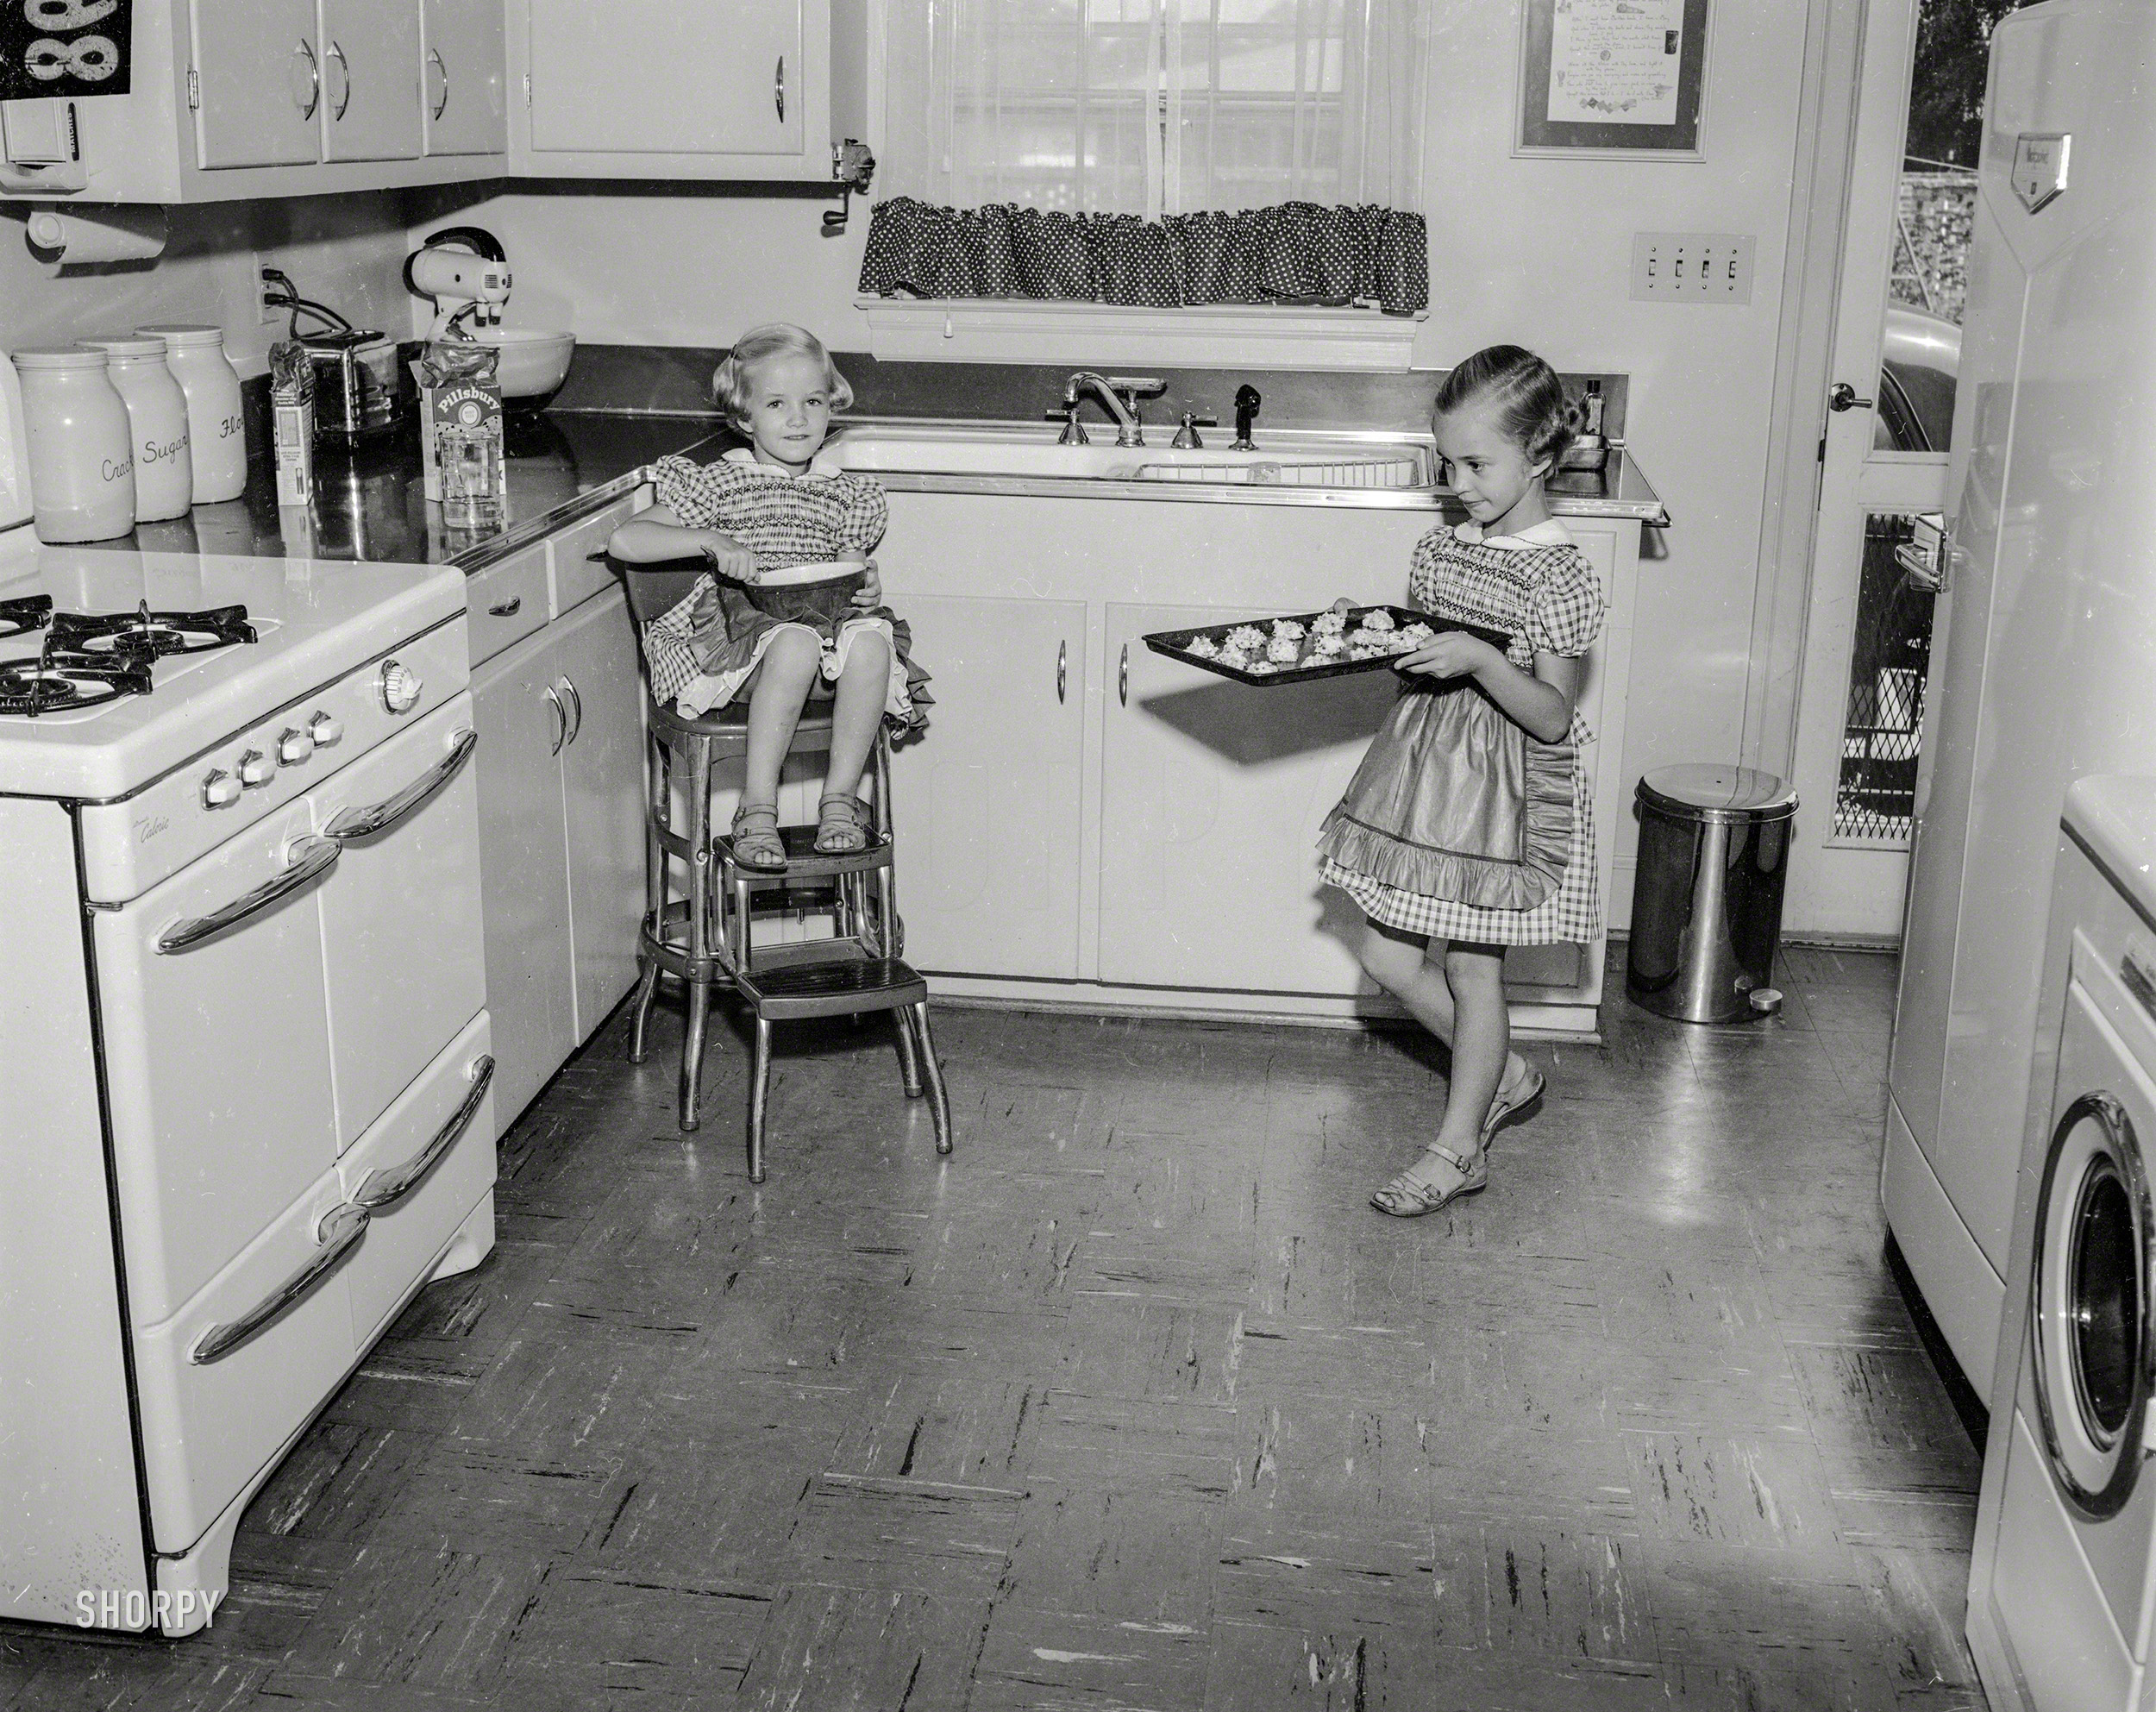 Columbus, Georgia, circa 1955, and our second visit with the Fabulous Baker Sisters. For Boomers of a certain age, this kitchen will likely spark a bonfire of memories. 4x5 acetate negative from the News Photo Archive. View full size.